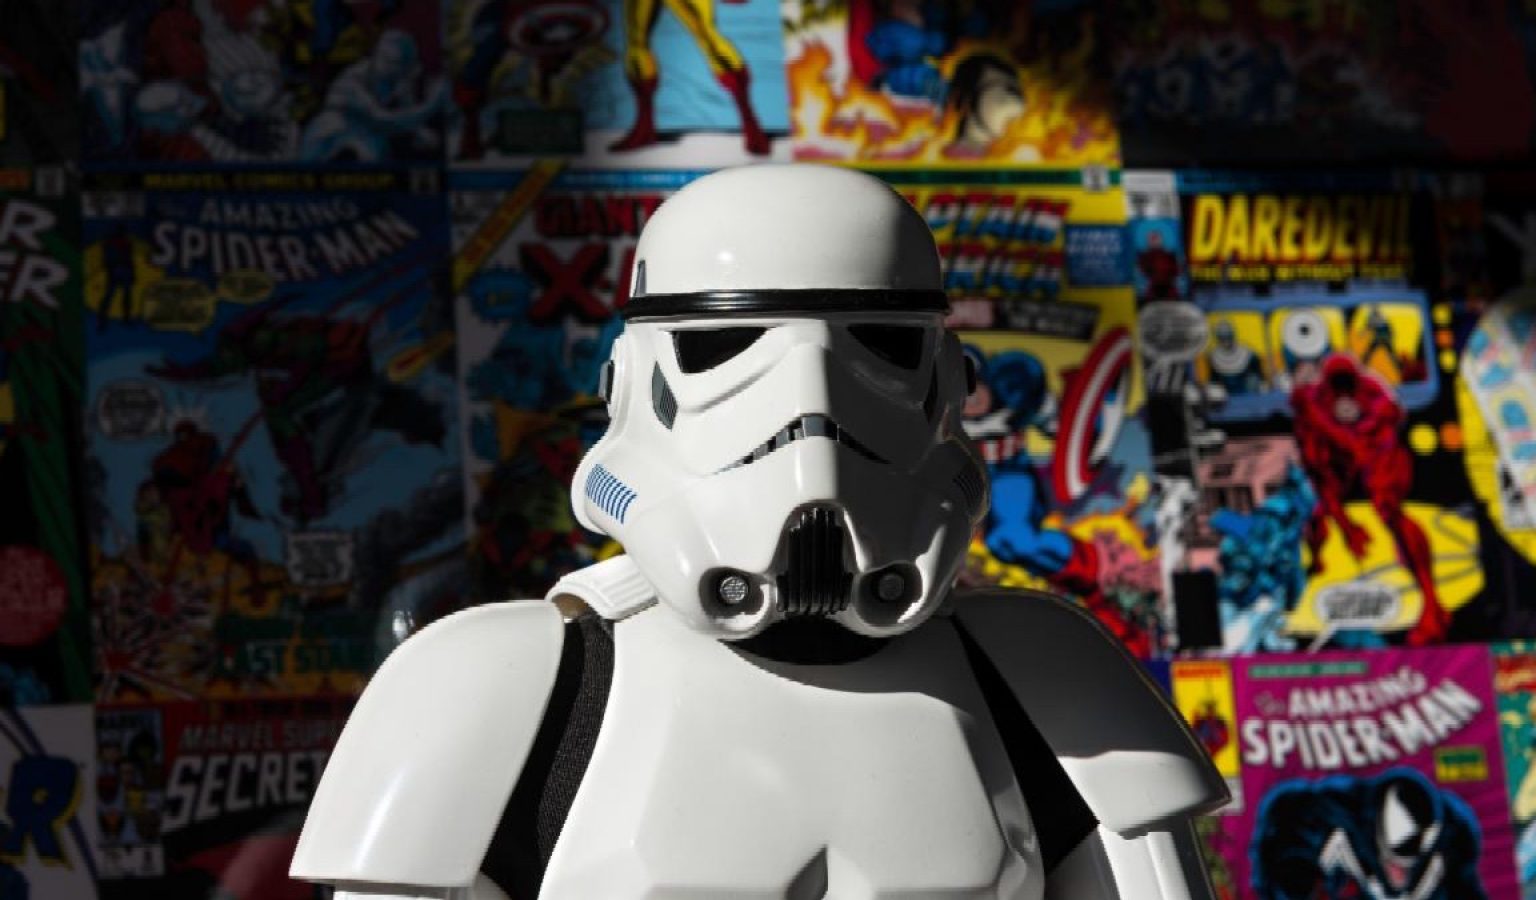 Star wars character in front of cartoon wall